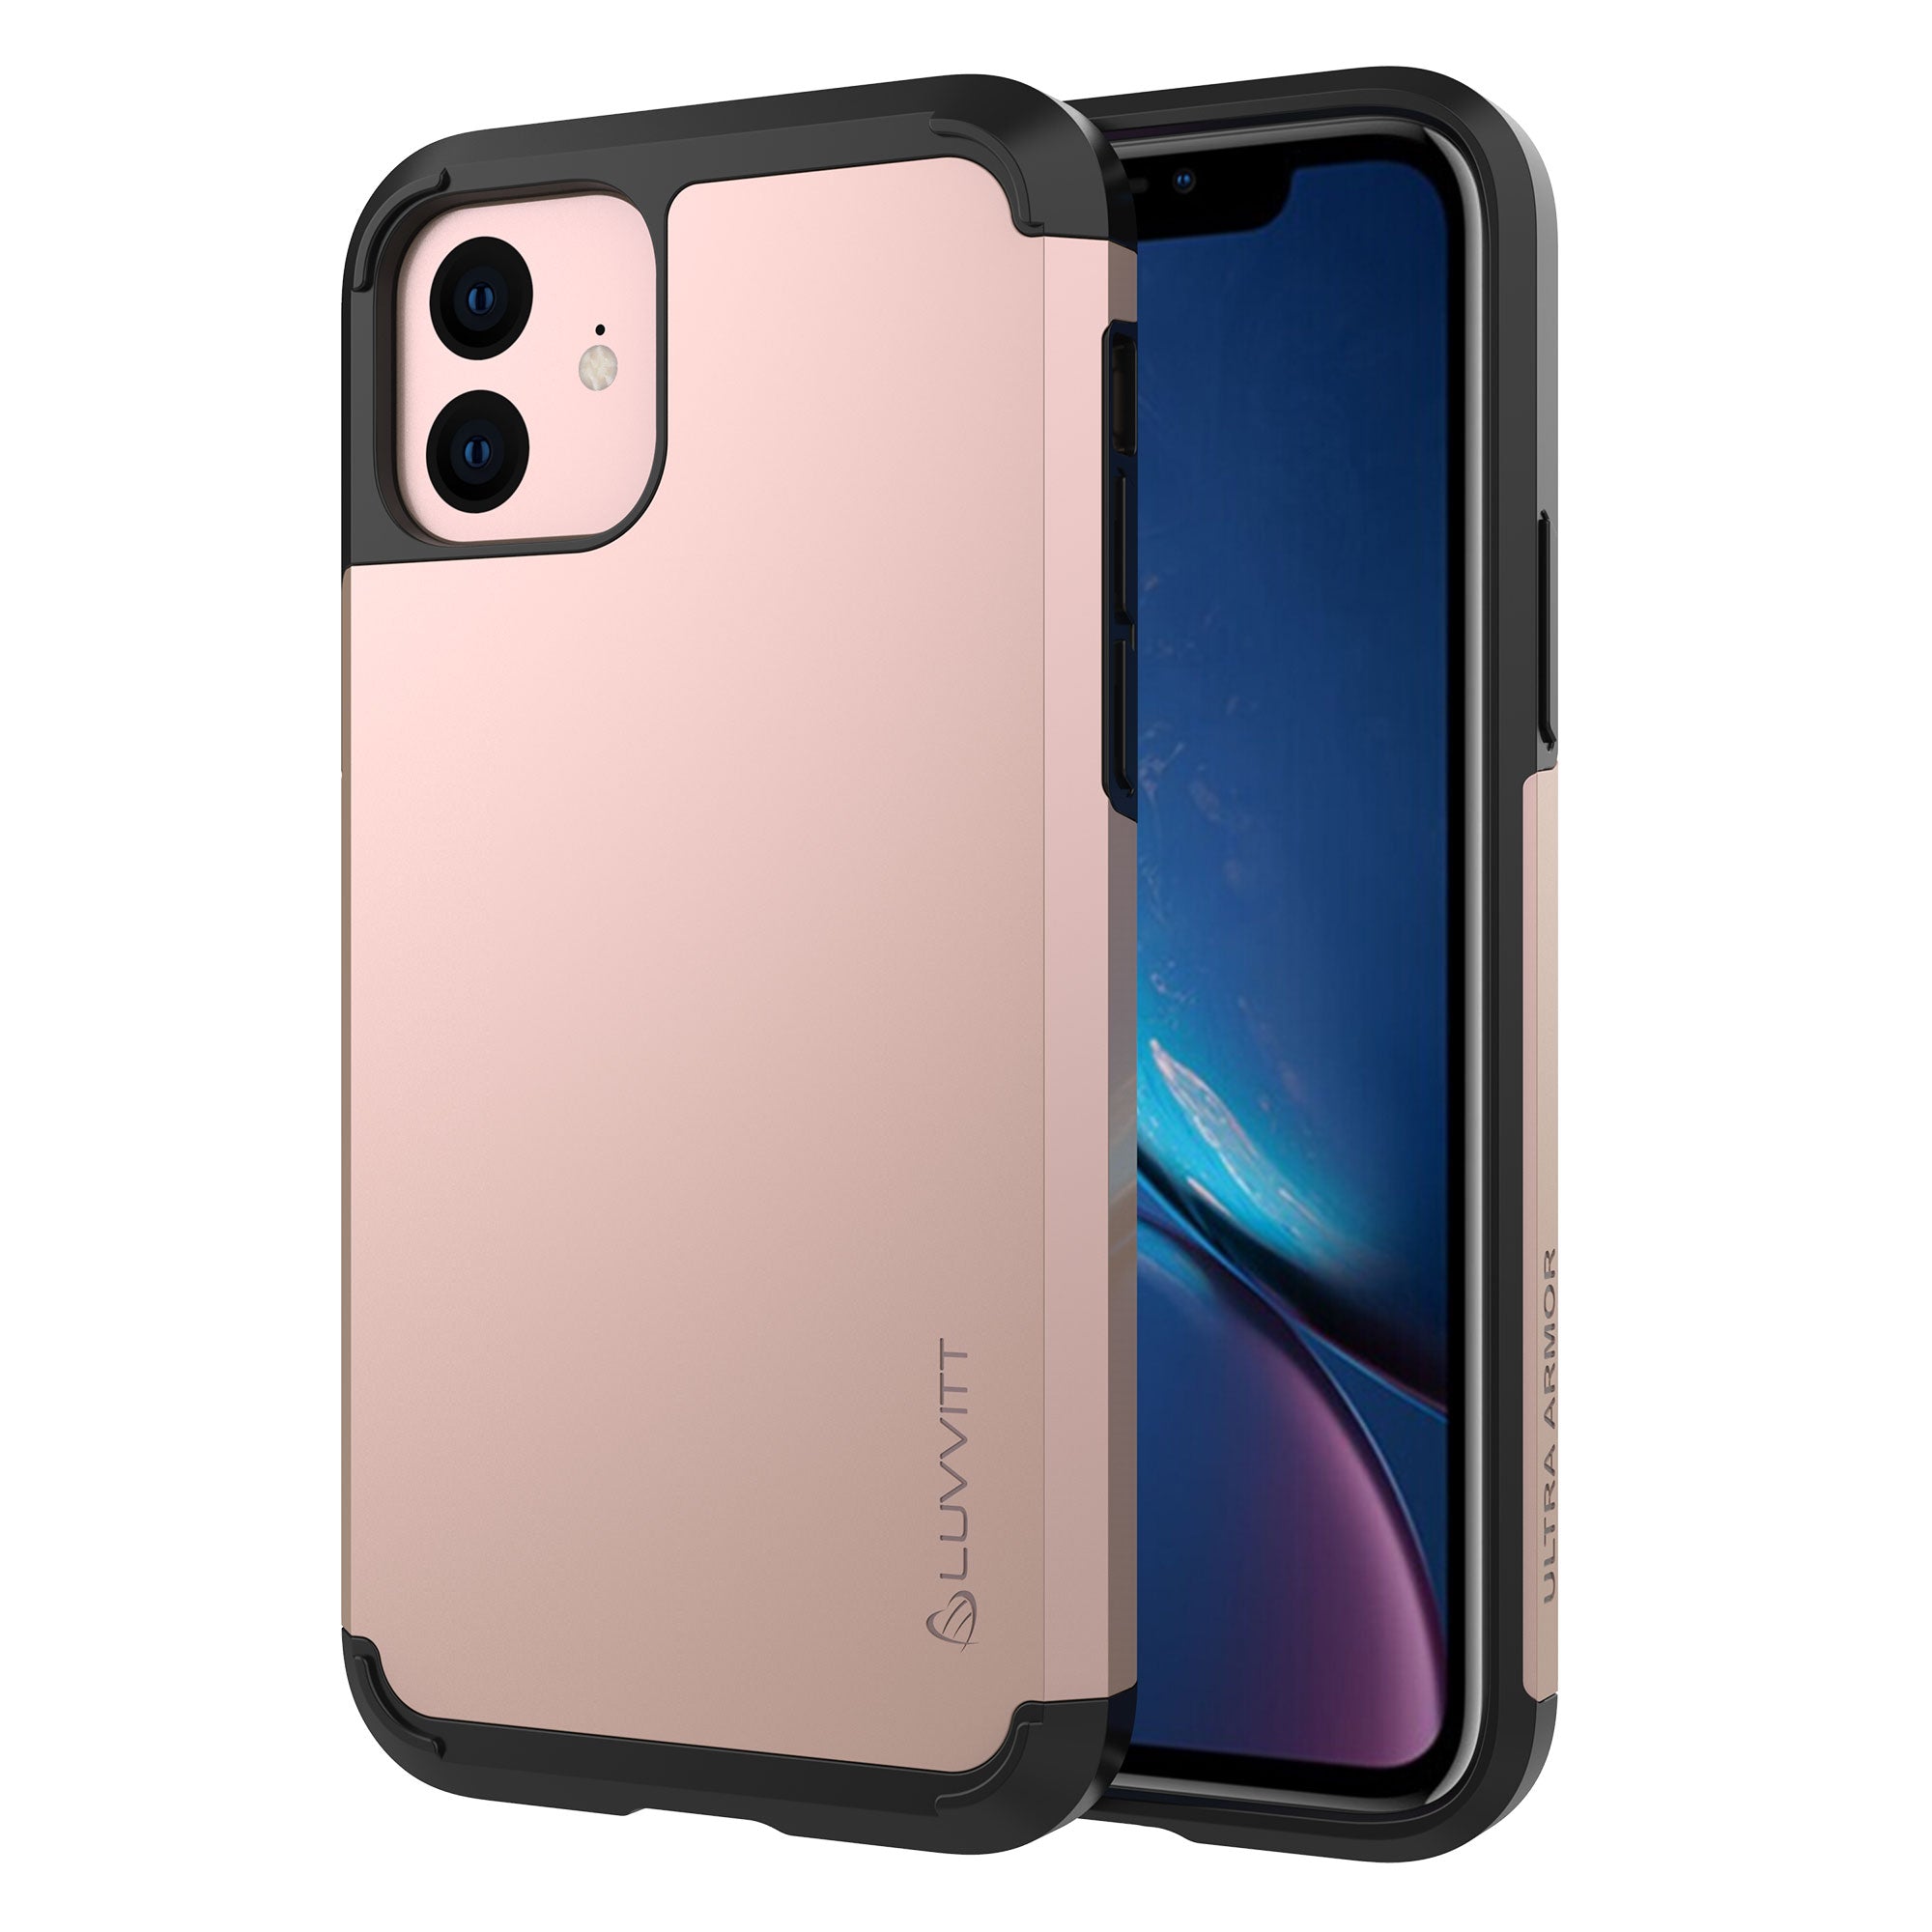 Luvvitt Ultra Armor Dual Layer Heavy Duty Case for iPhone 11 2019 - Rose Gold